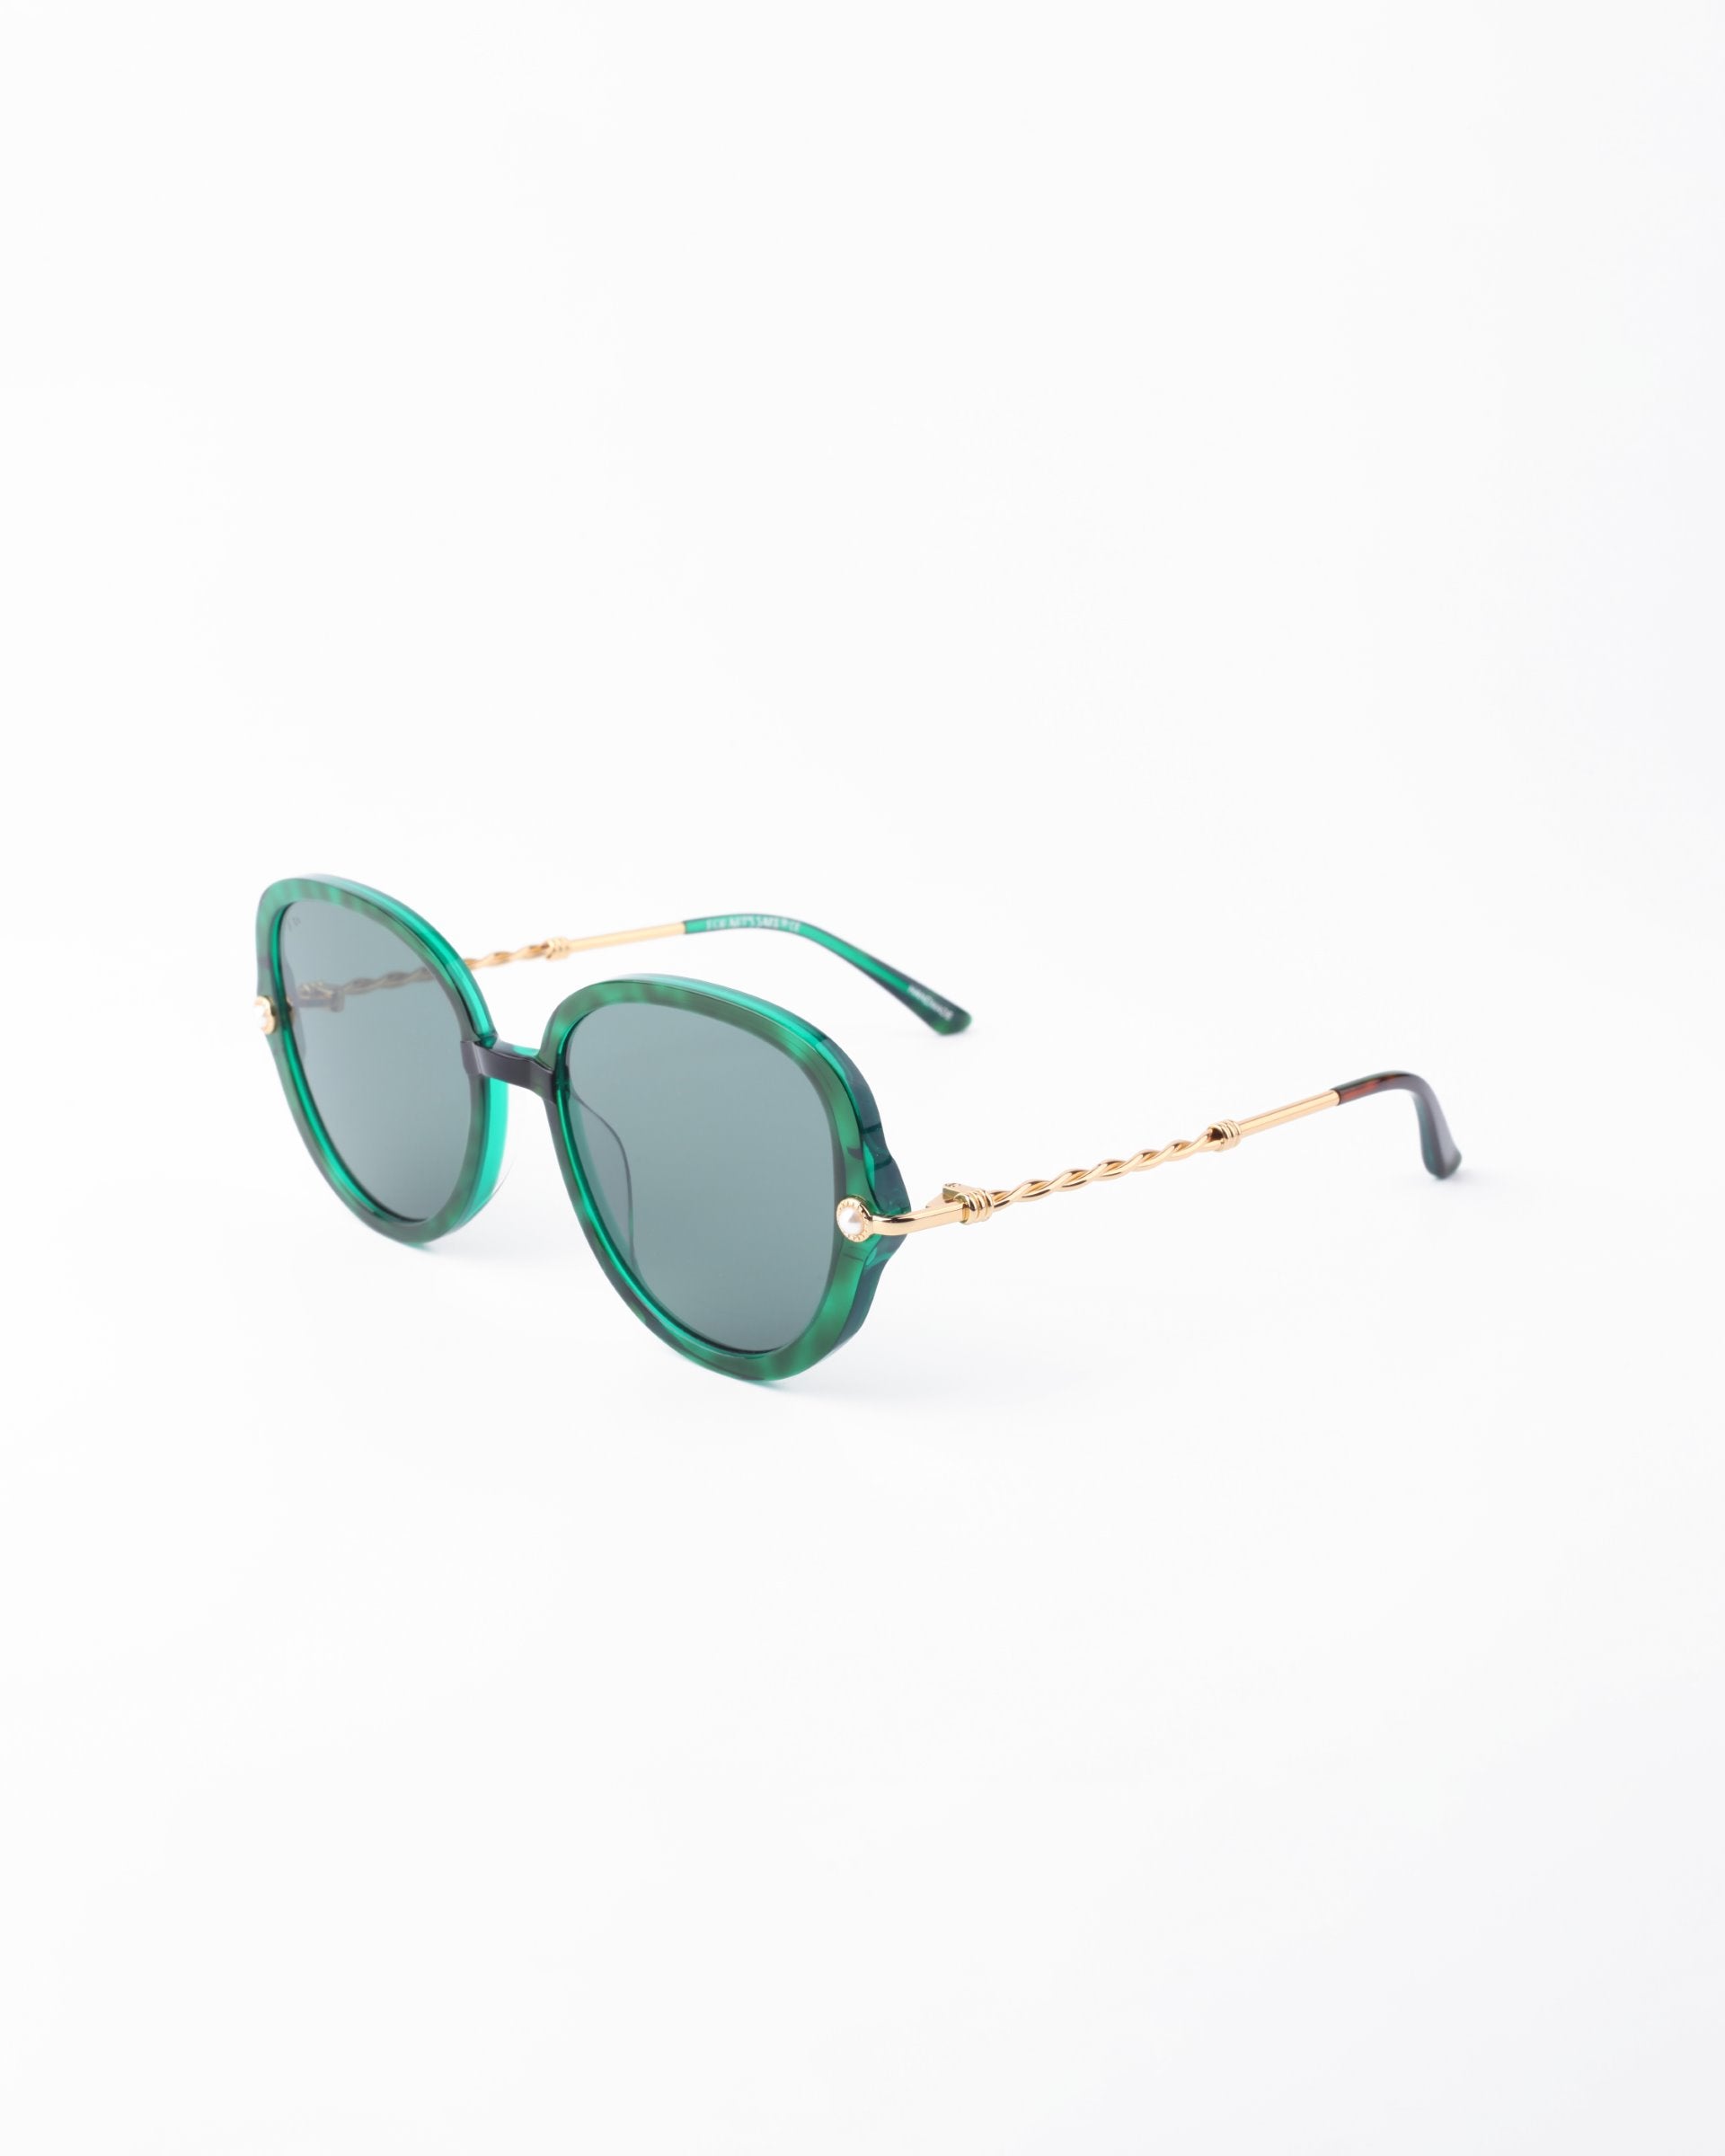 A pair of stylish For Art&#39;s Sake® Primrose sunglasses with green-tinted round lenses and handmade gold-plated metal arms. The frames are green with a glossy finish, made from plant-based acetate, and the twisted design on the arms adds a unique touch. The ends of the arms are black, and they feature an anti-reflective coating for enhanced comfort. Displayed on a white background.